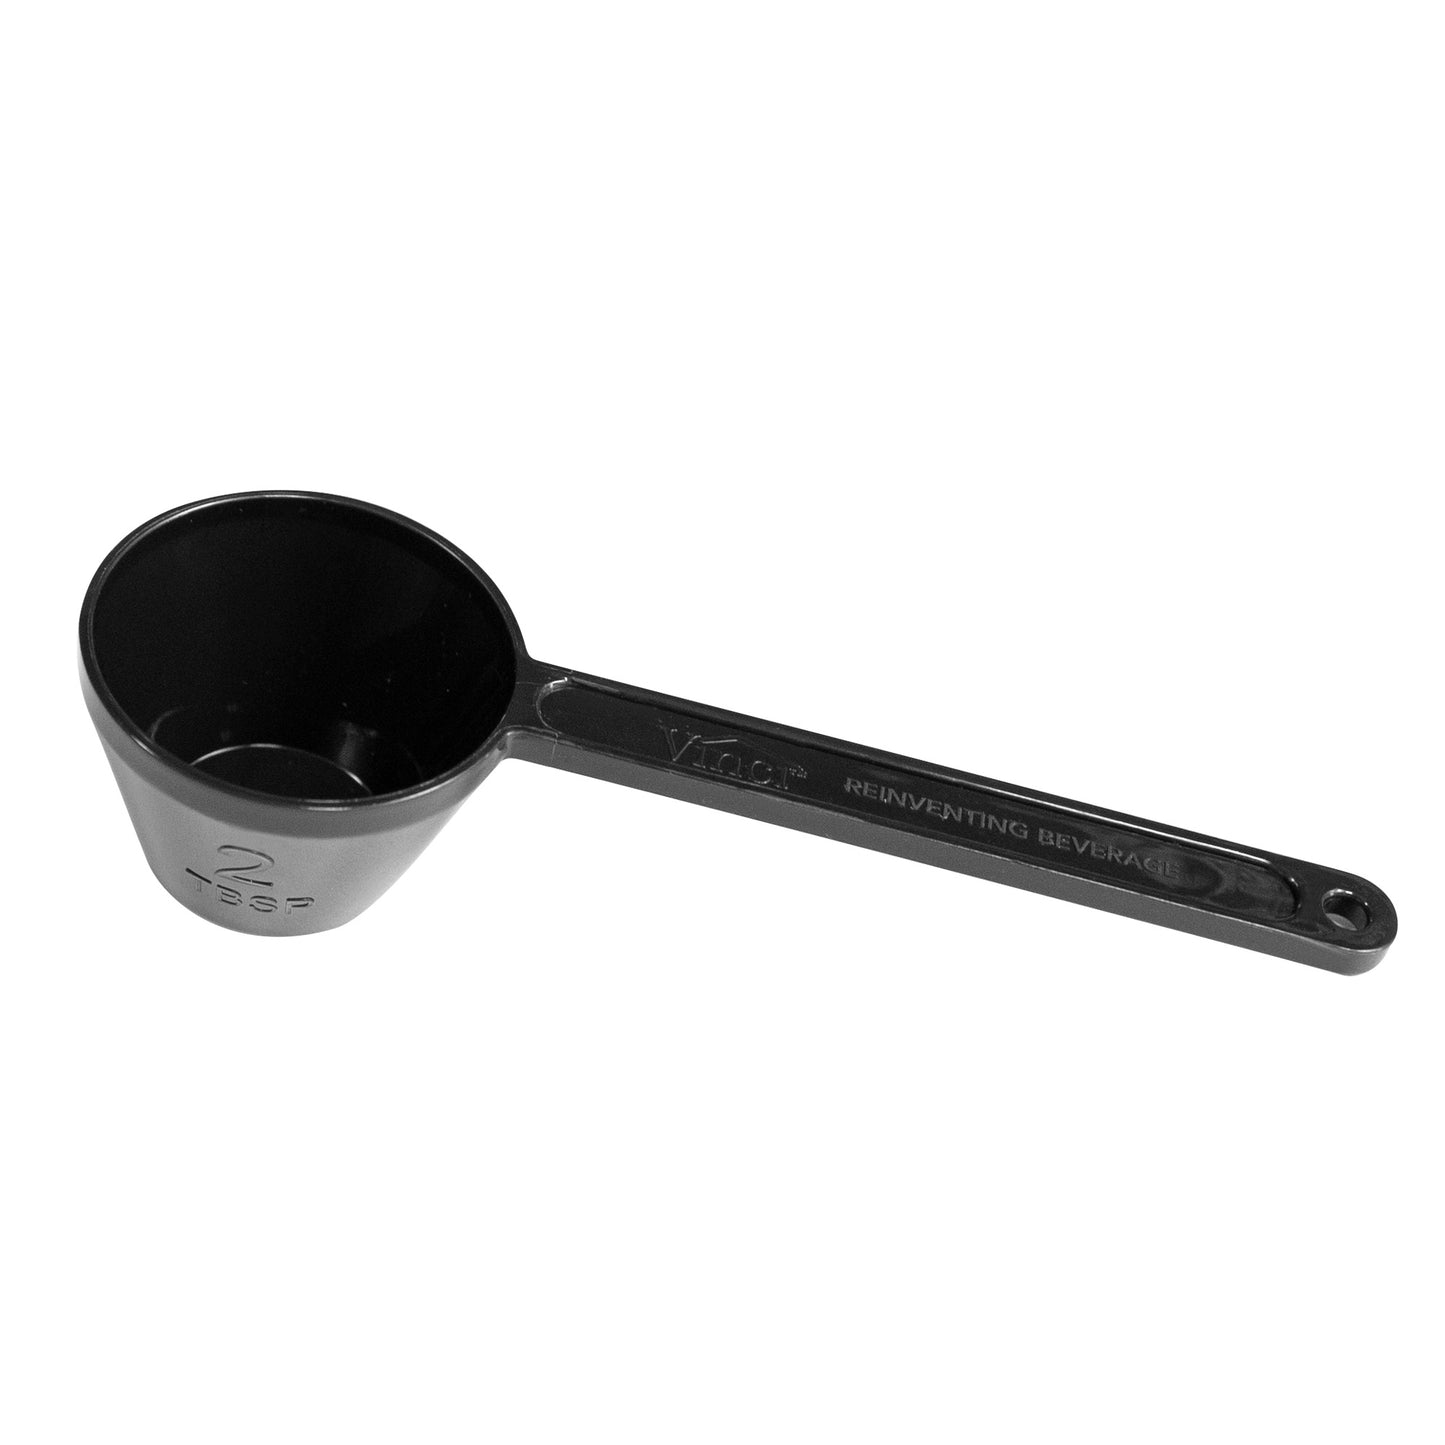 Coffee Scoop (2 Tbsp) - Express Cold Brew